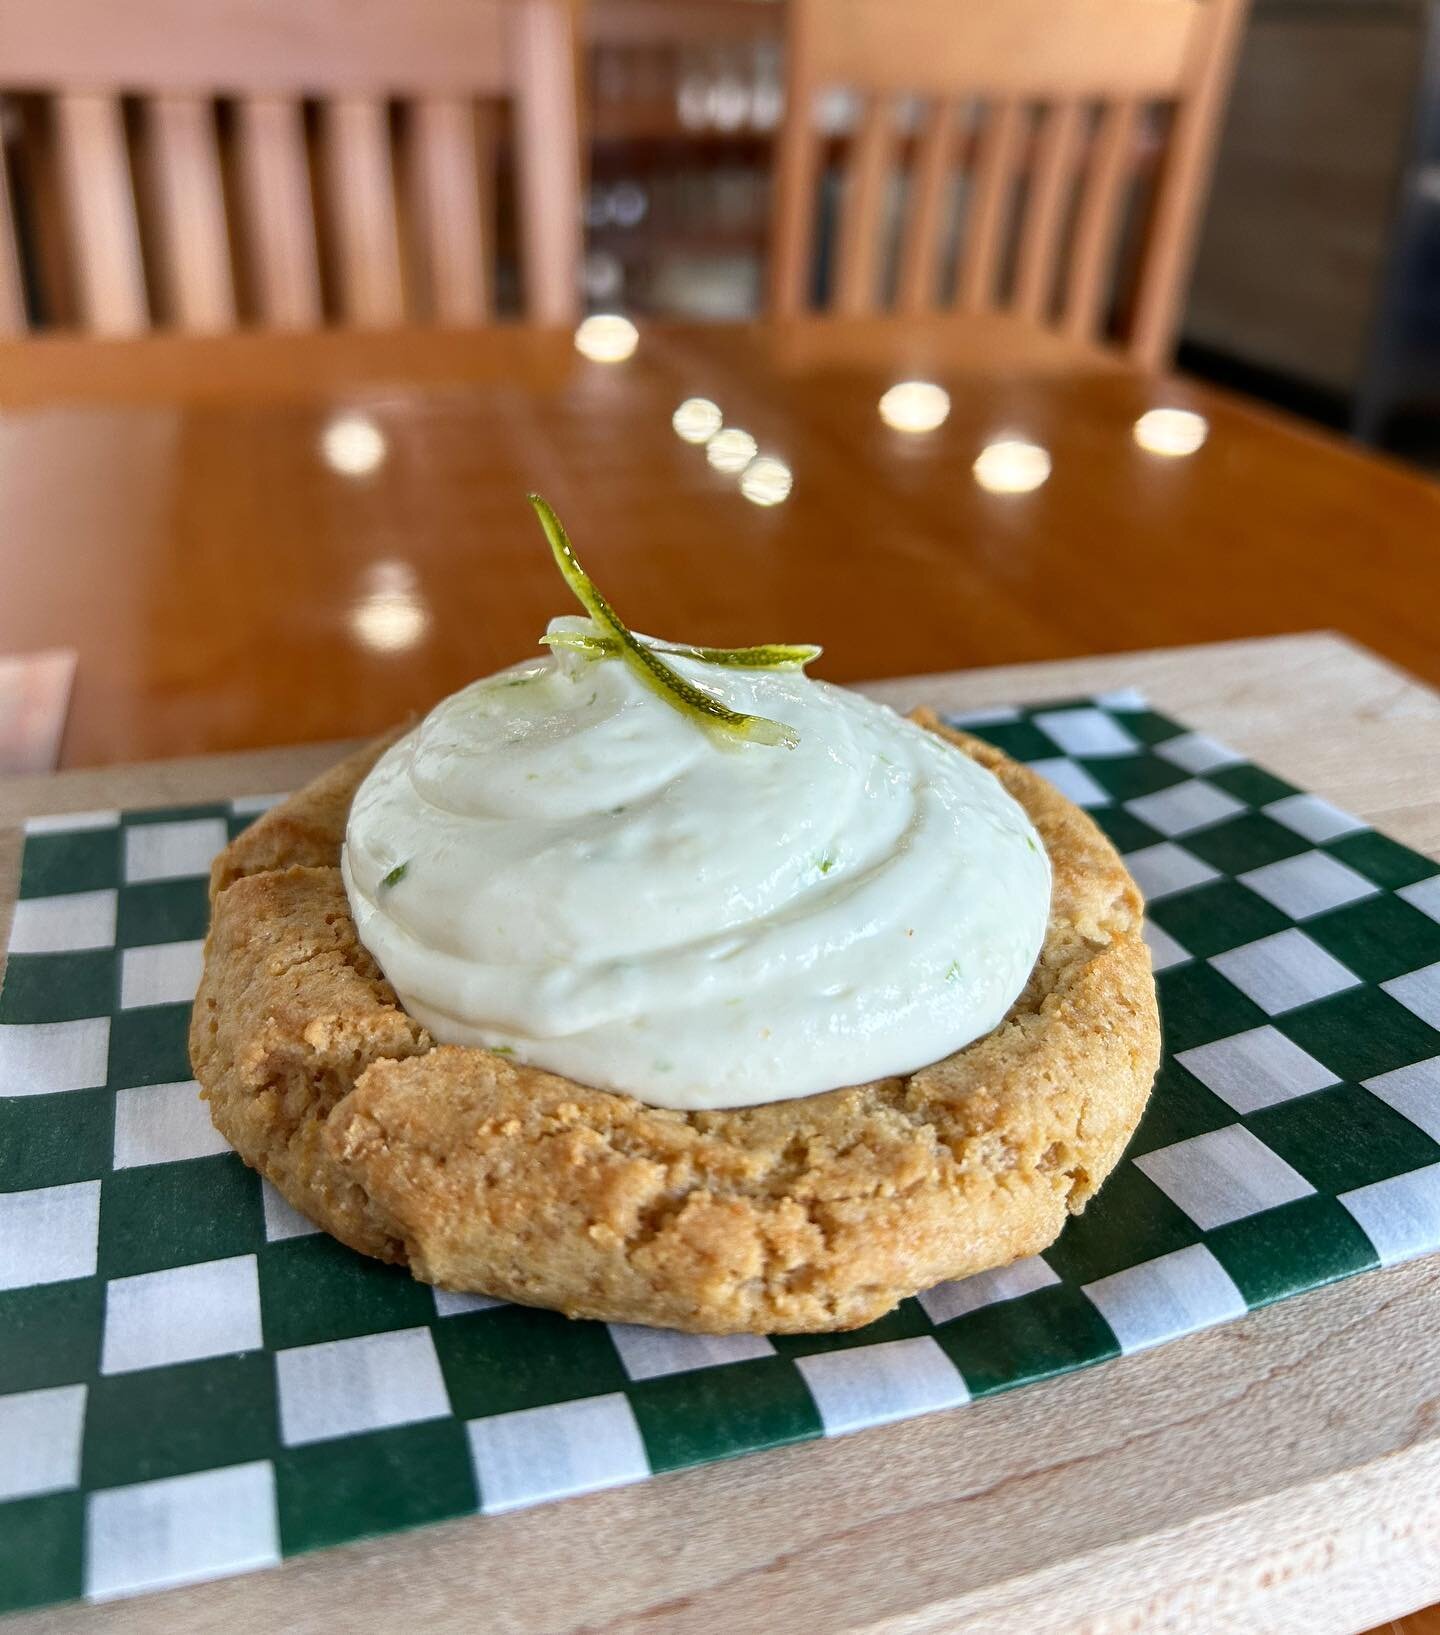 We call it the &ldquo;Fookie&rdquo; 
It&rsquo;s a filled cookie. Todays offering is a Key Lime pie filled graham cracker cookie. 100% made in house. 
We will be changing up the fillings and cookie bases but expect to have these on our staple menu unl